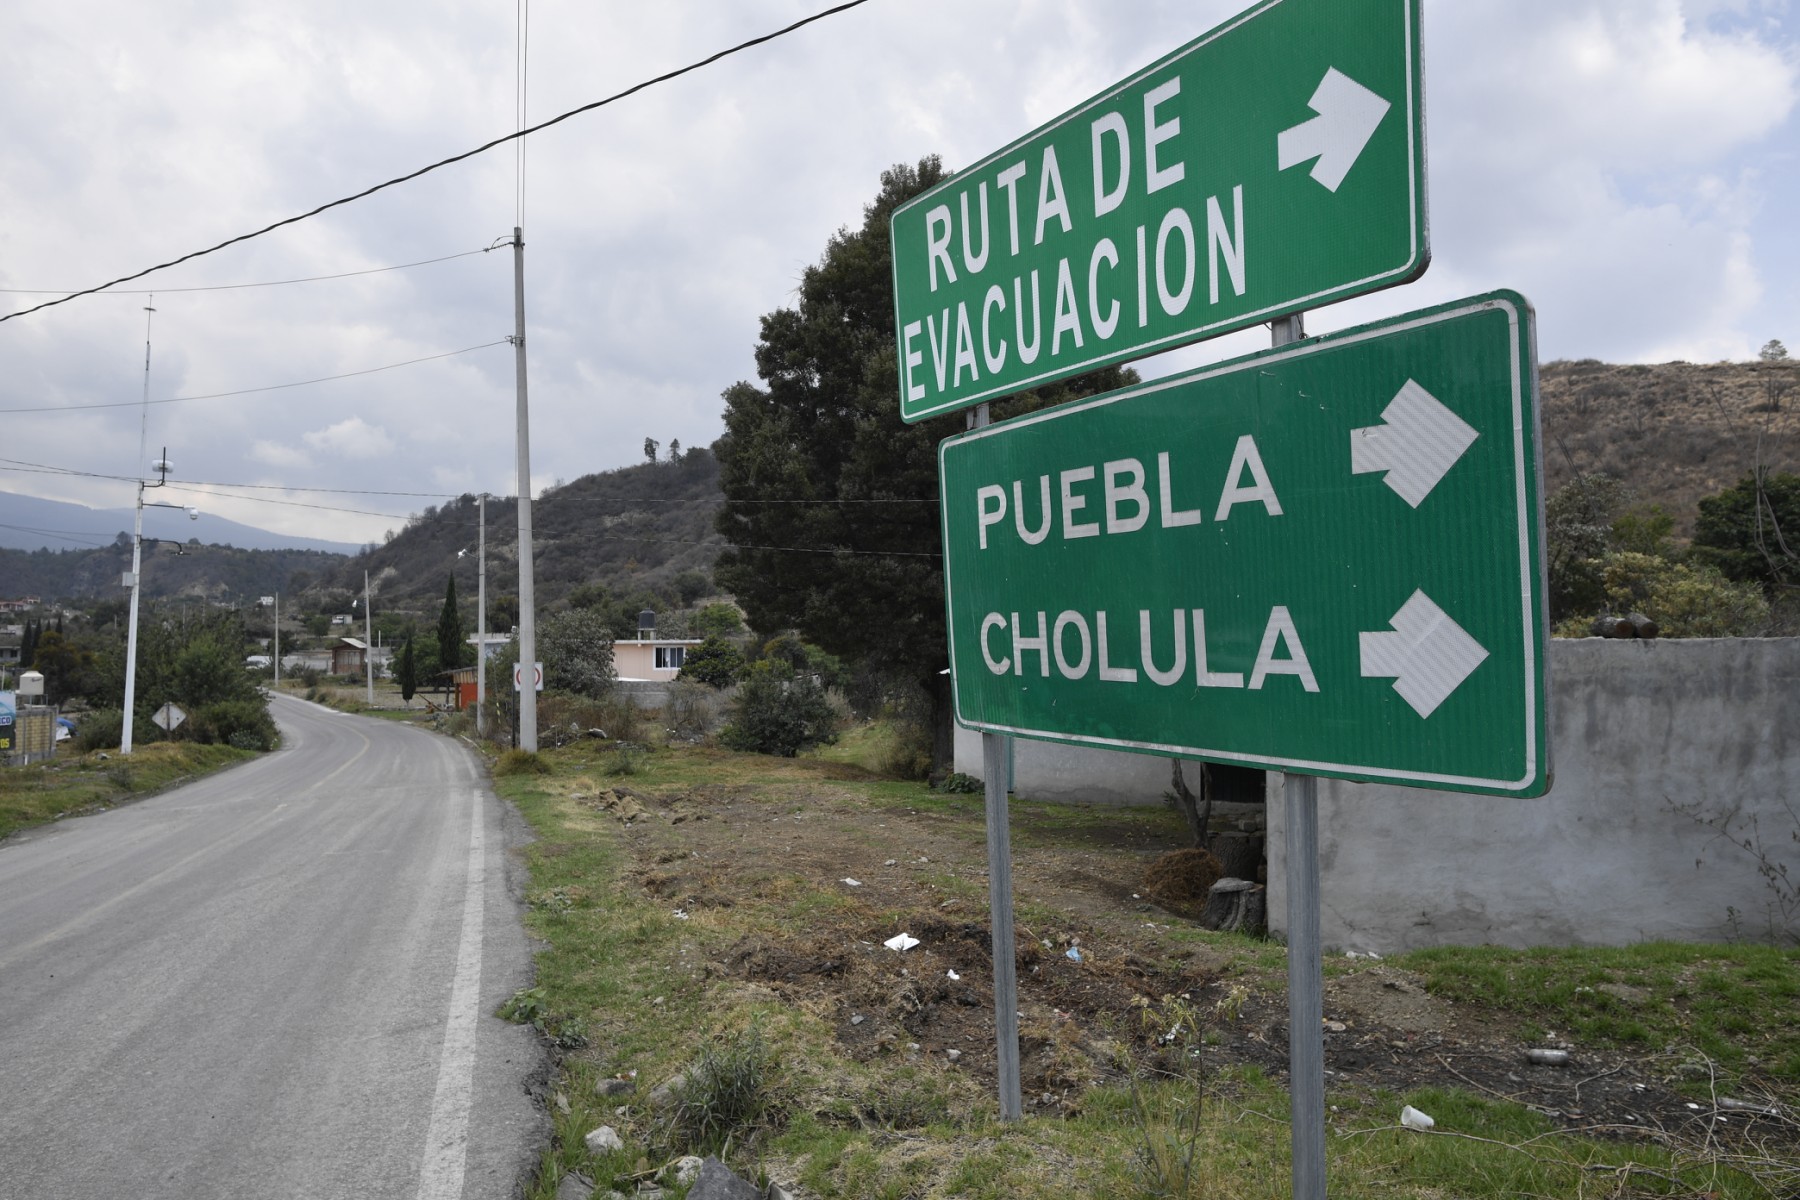 An evacuation route sign is seen in Santiago Xalitzintla, Puebla state, Mexico, on May 25, 2023. - The Popocatepetl volcano, located around 70 kilometres (about 45 miles) from Mexico City, spewed more gas and ash into the sky on May 23 as authorities maintained their warning level at one step below red alert. The government is monitoring Popocatepetl "day and night," President Andres Manuel Lopez Obrador said after the volcano put on another fiery show overnight. 